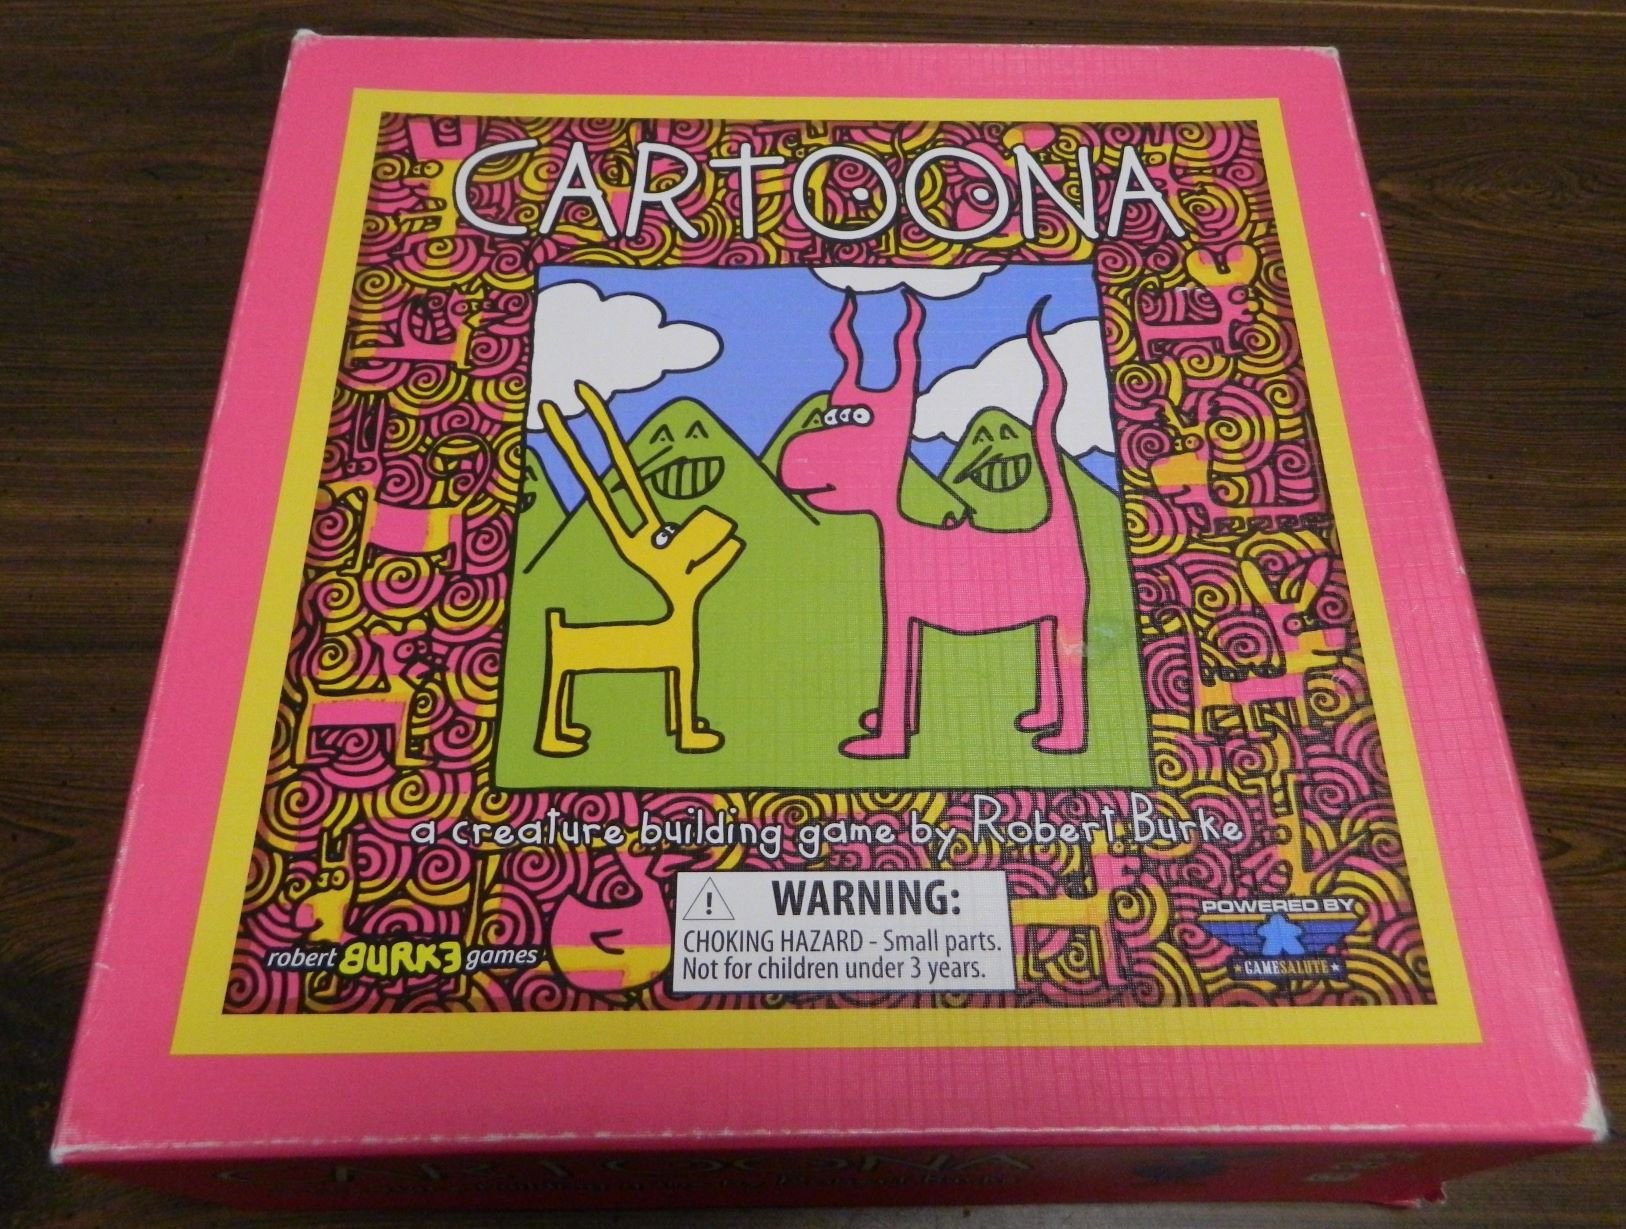 Cartoona Board Game Review and Rules